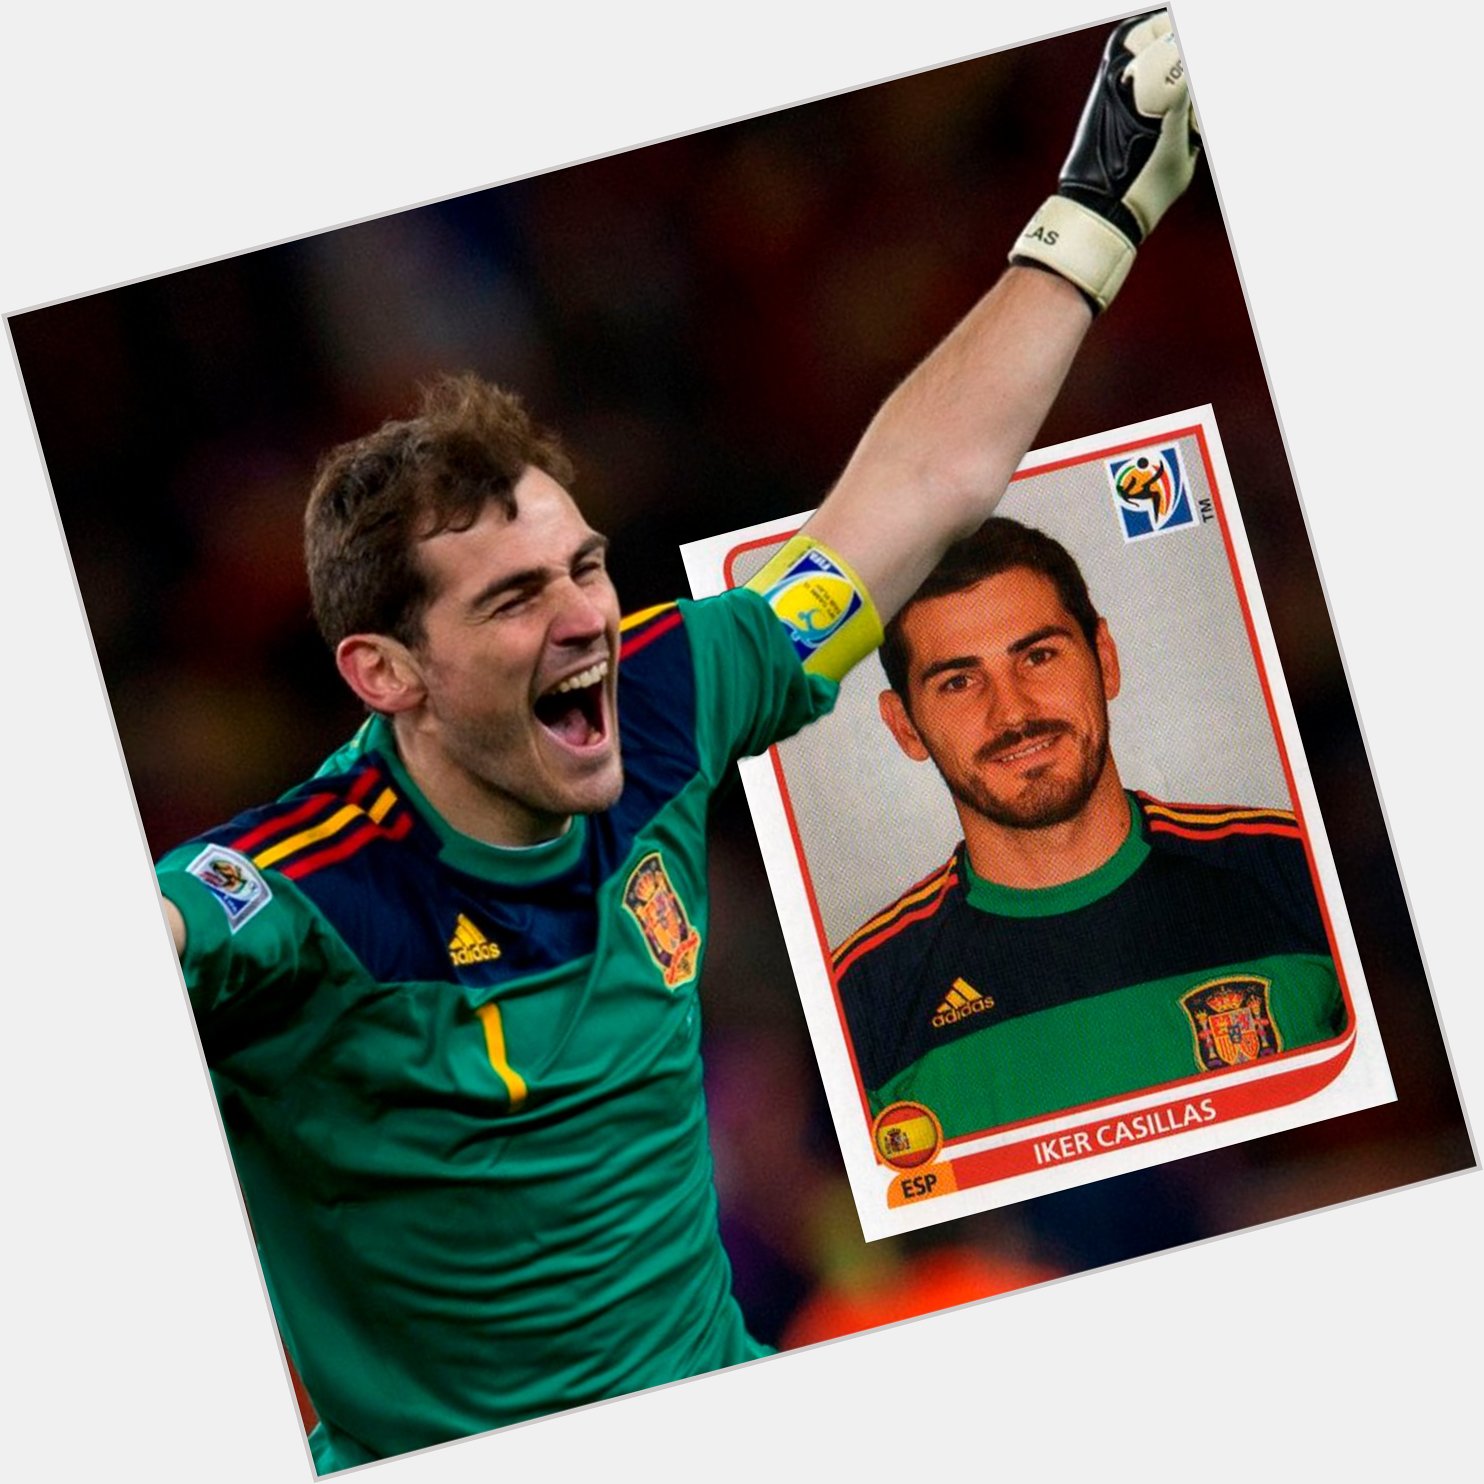 Happy birthday, Iker Casillas!!!
Do you think he could be the best goalkeeper in the history? 